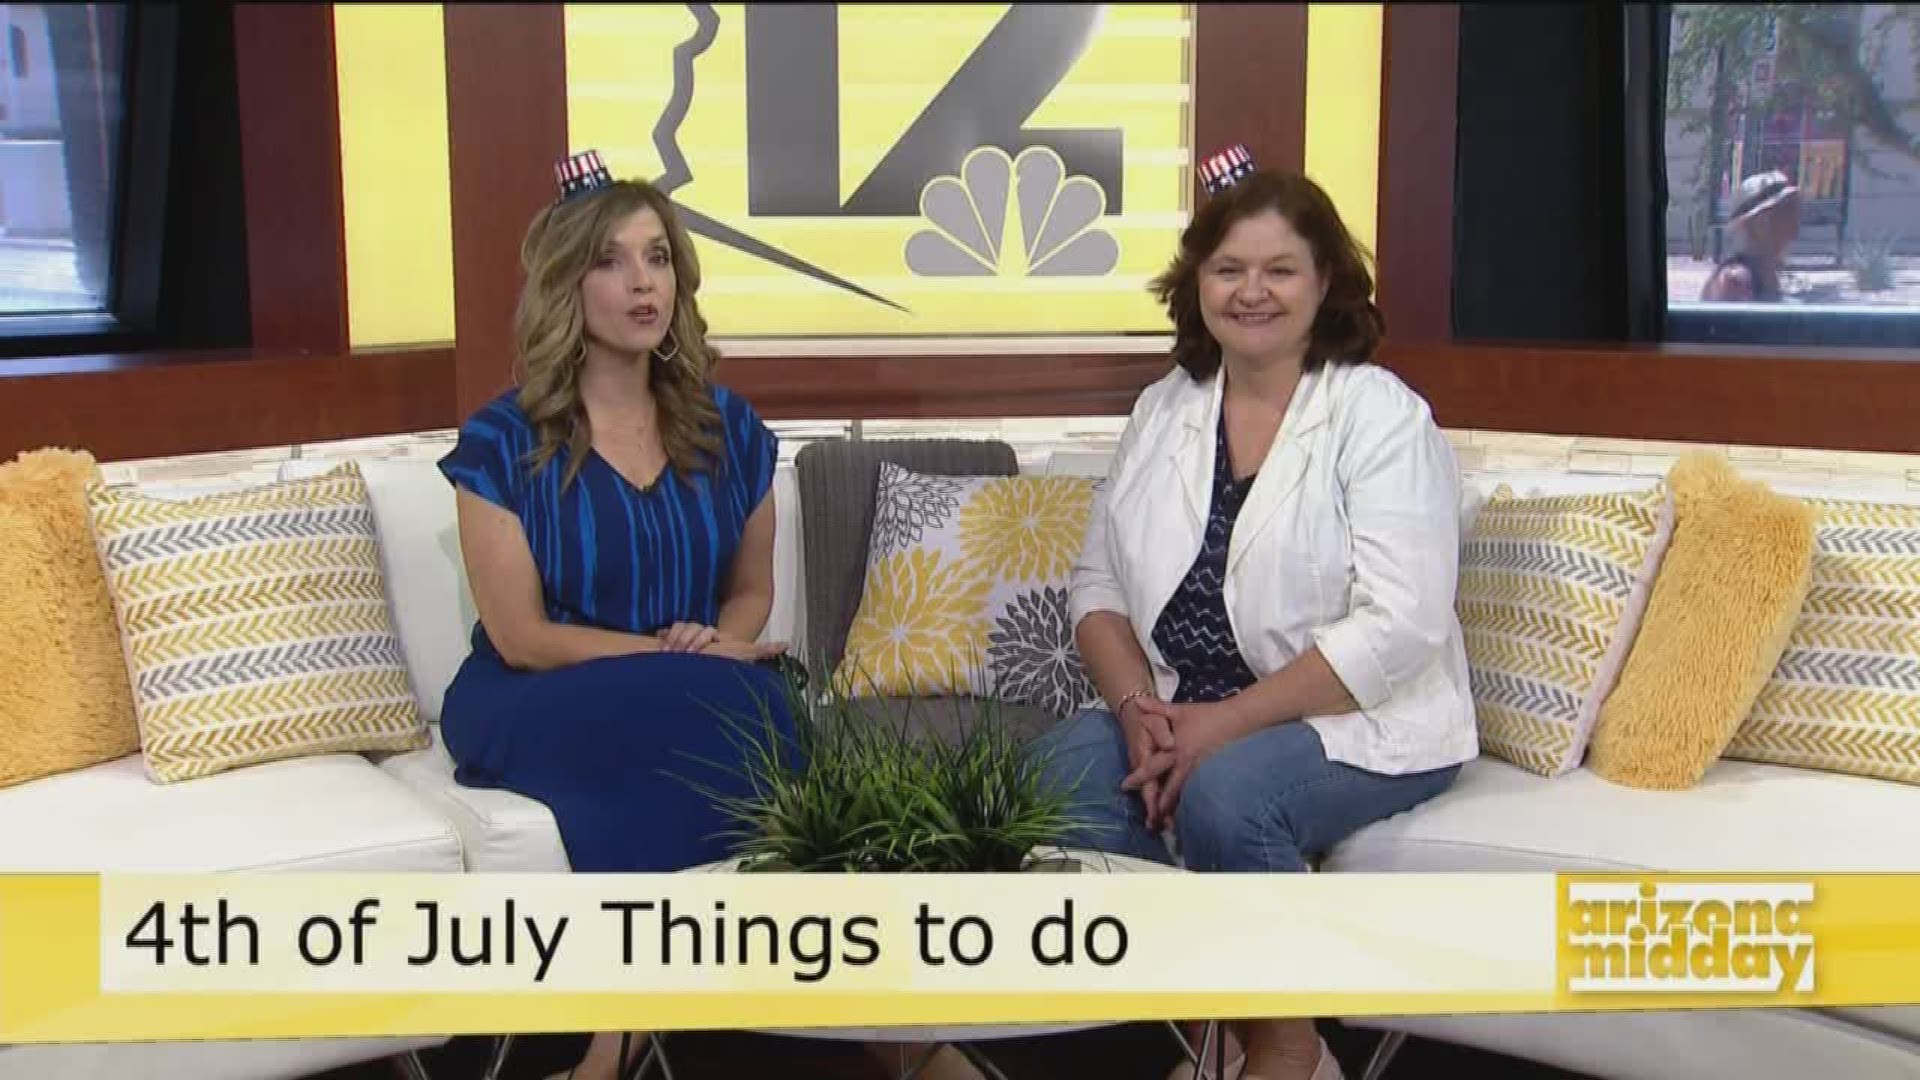 Mala Bloomquist tells us all the events to go to for Independence Day in the Valley